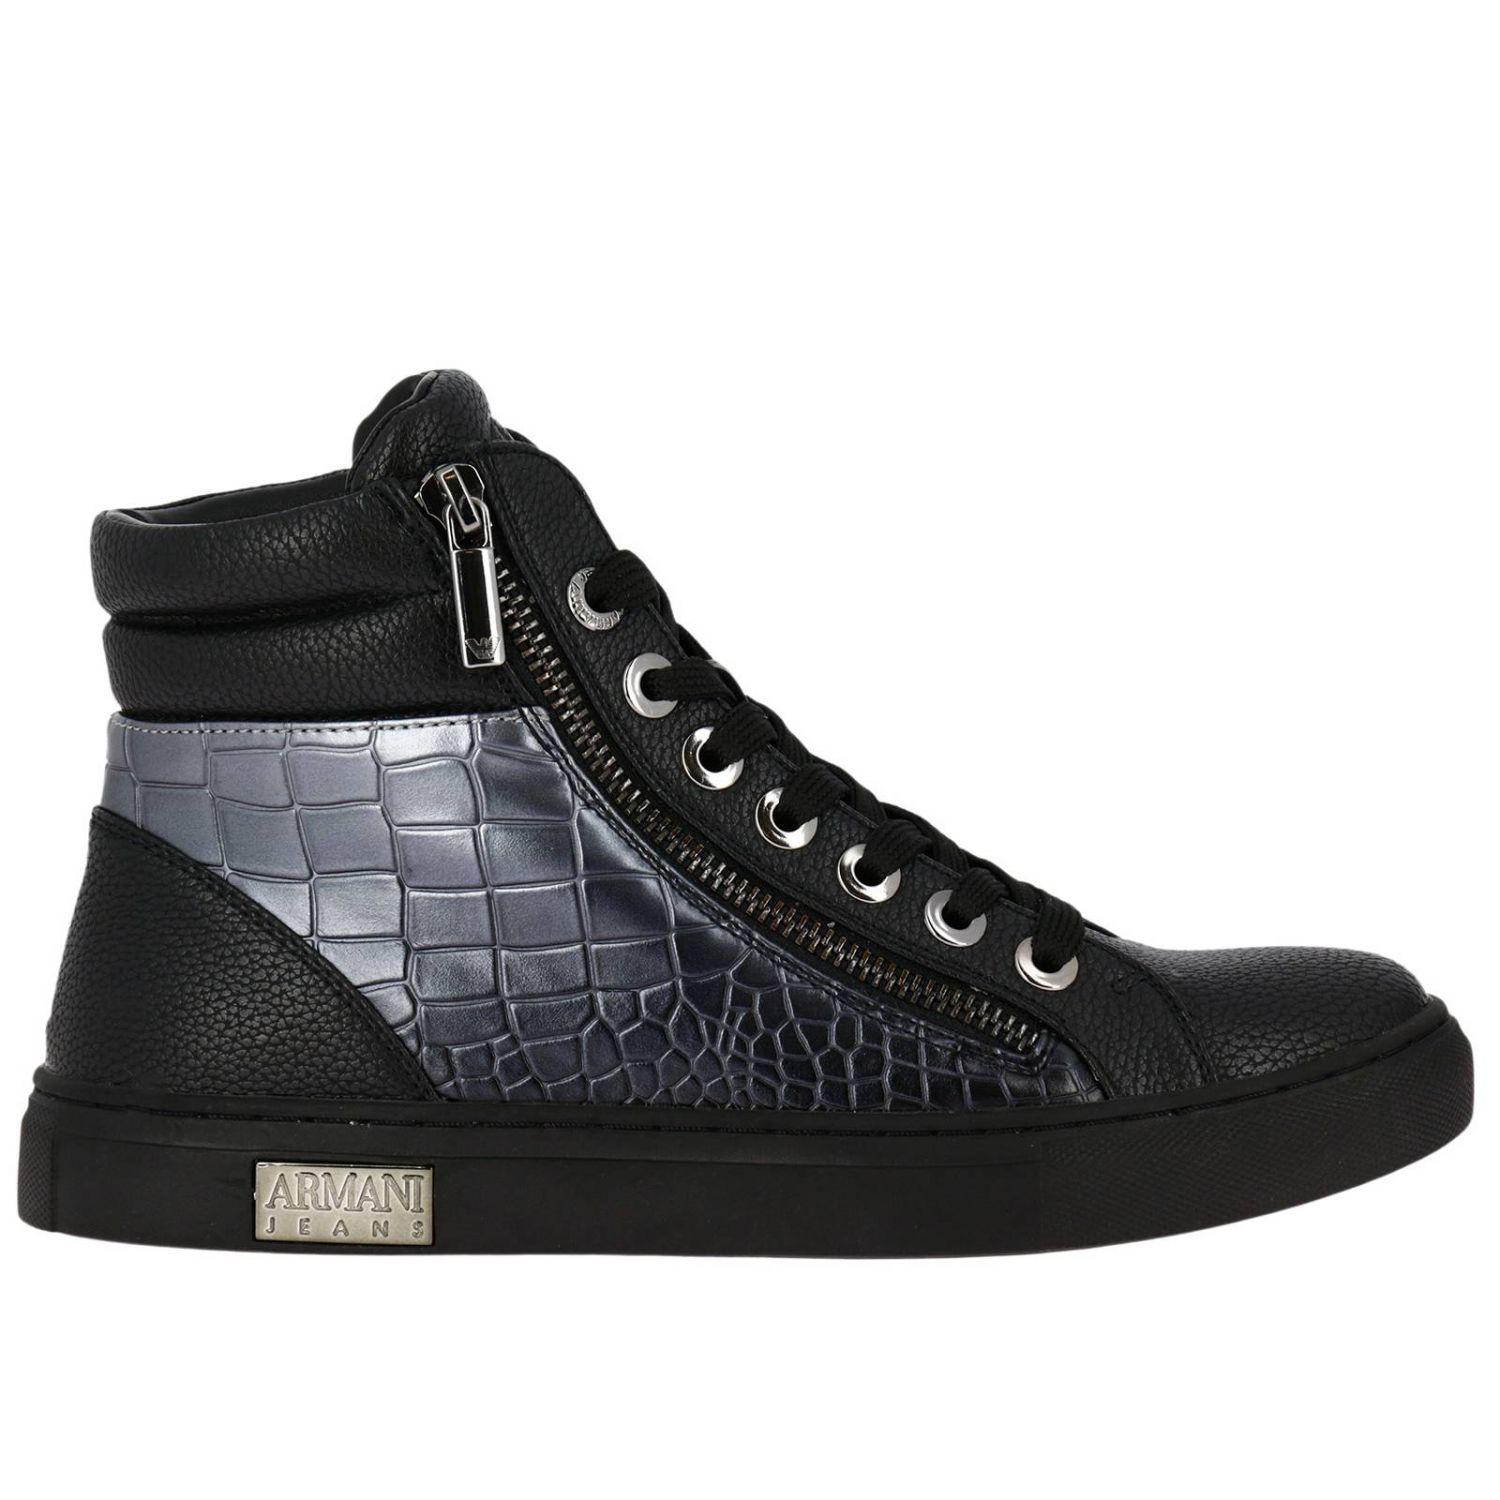 armani jeans trainers womens - 61% OFF 